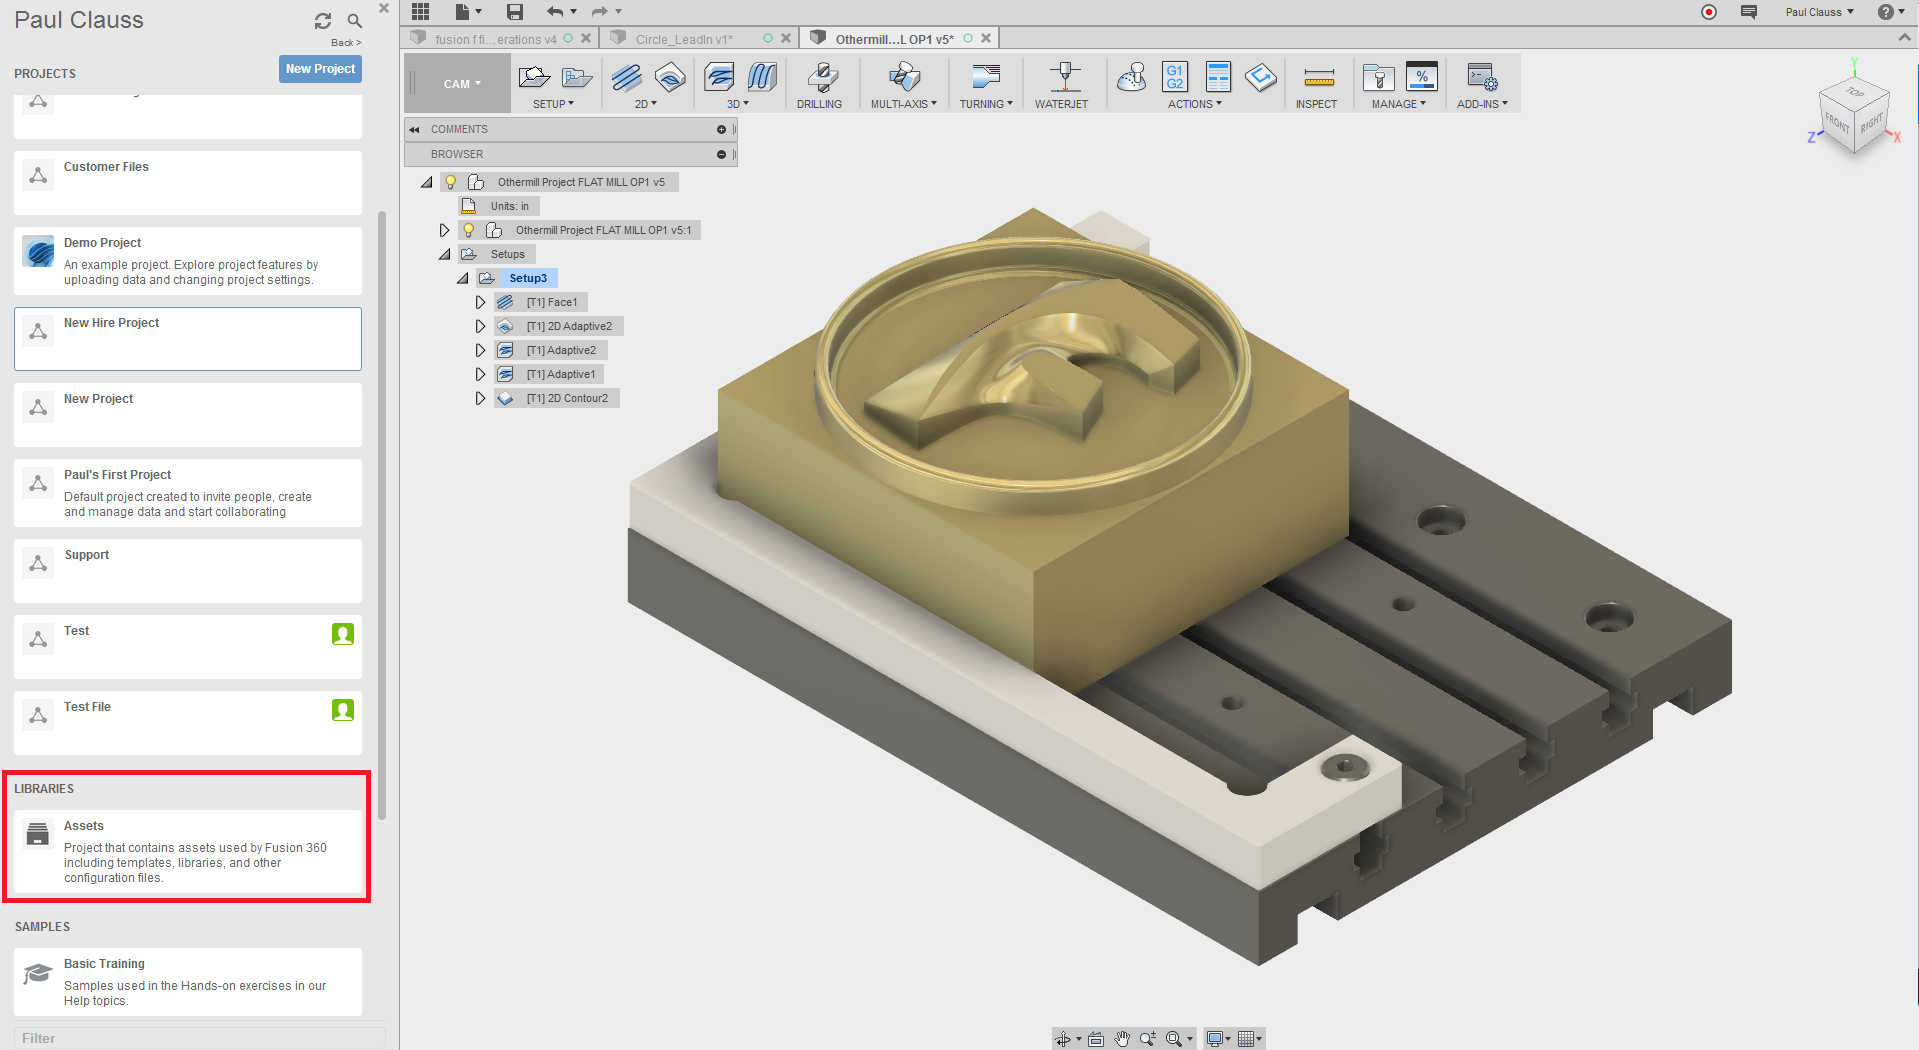 How to install a cloud tool library in Fusion 360 | Fusion 360 | Knowledge Network